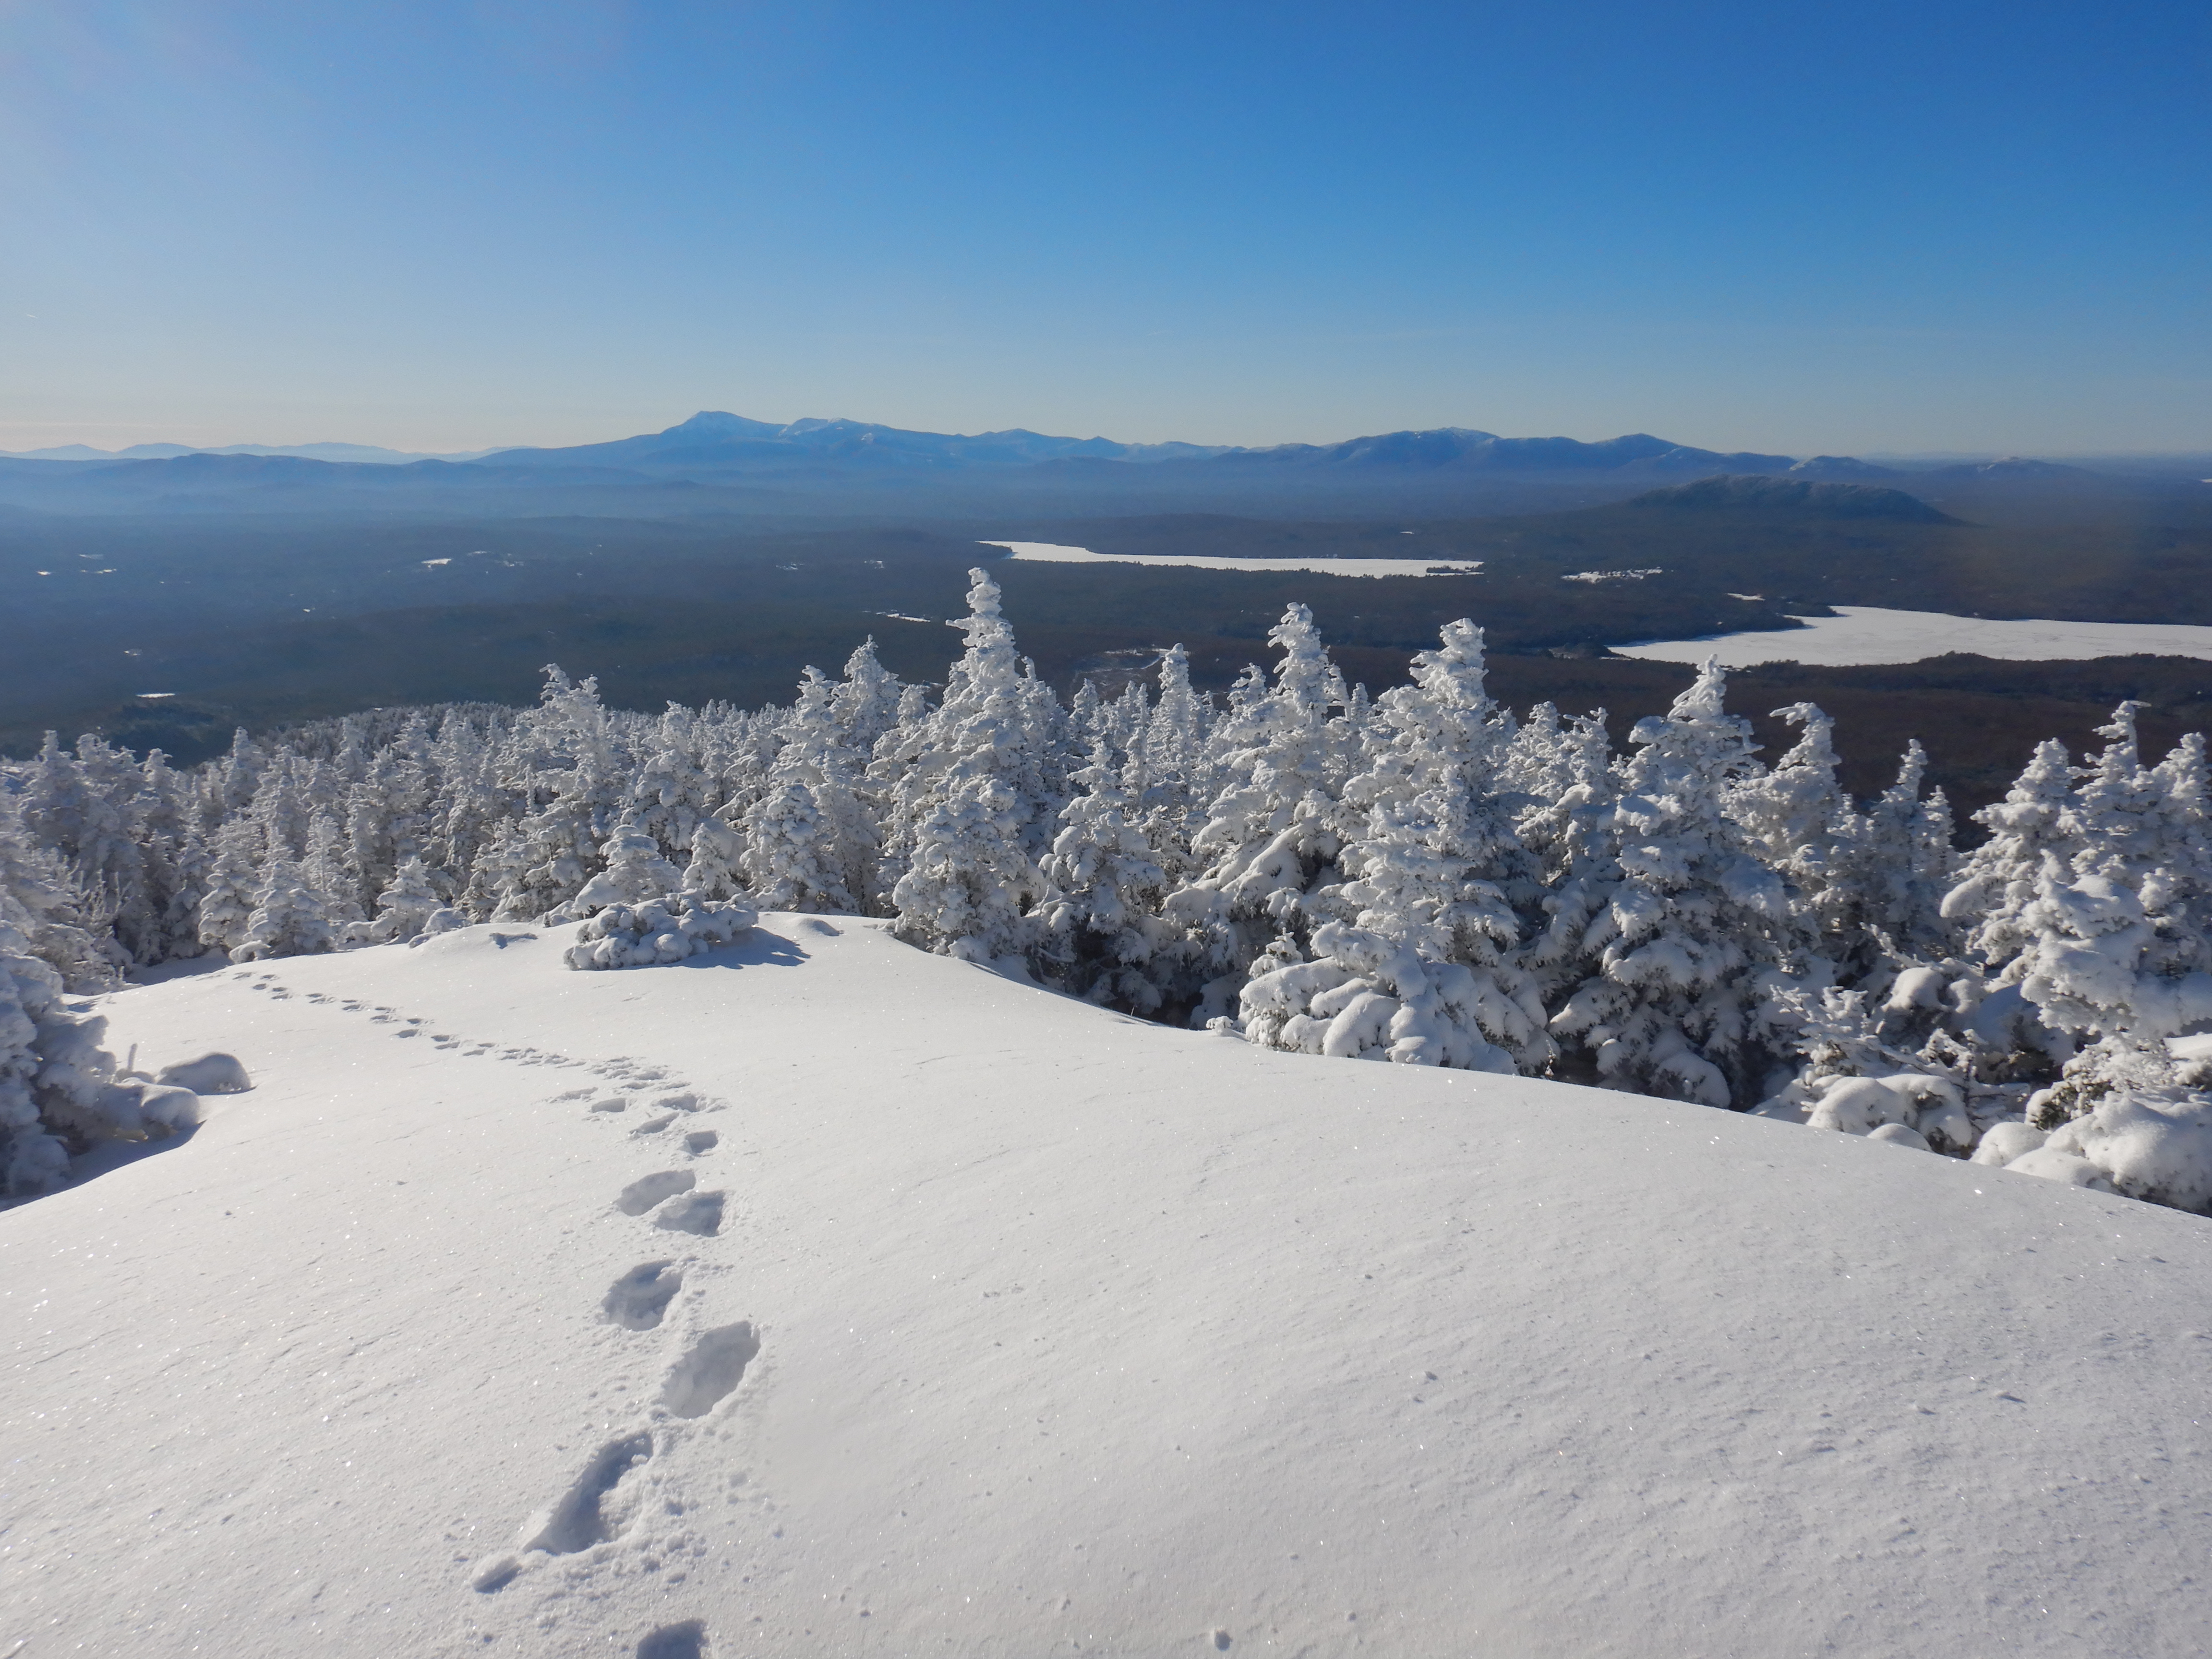 View of forested landscape from mountain summit. Snow covers ground at bottom. A single set of human footprints cross them toward the perspective of the camera. Snow-covered spruce and fir trees cover the near slopes. Ice covered ponds and forest fill the lowlands. A line of mountains forms the horizon.